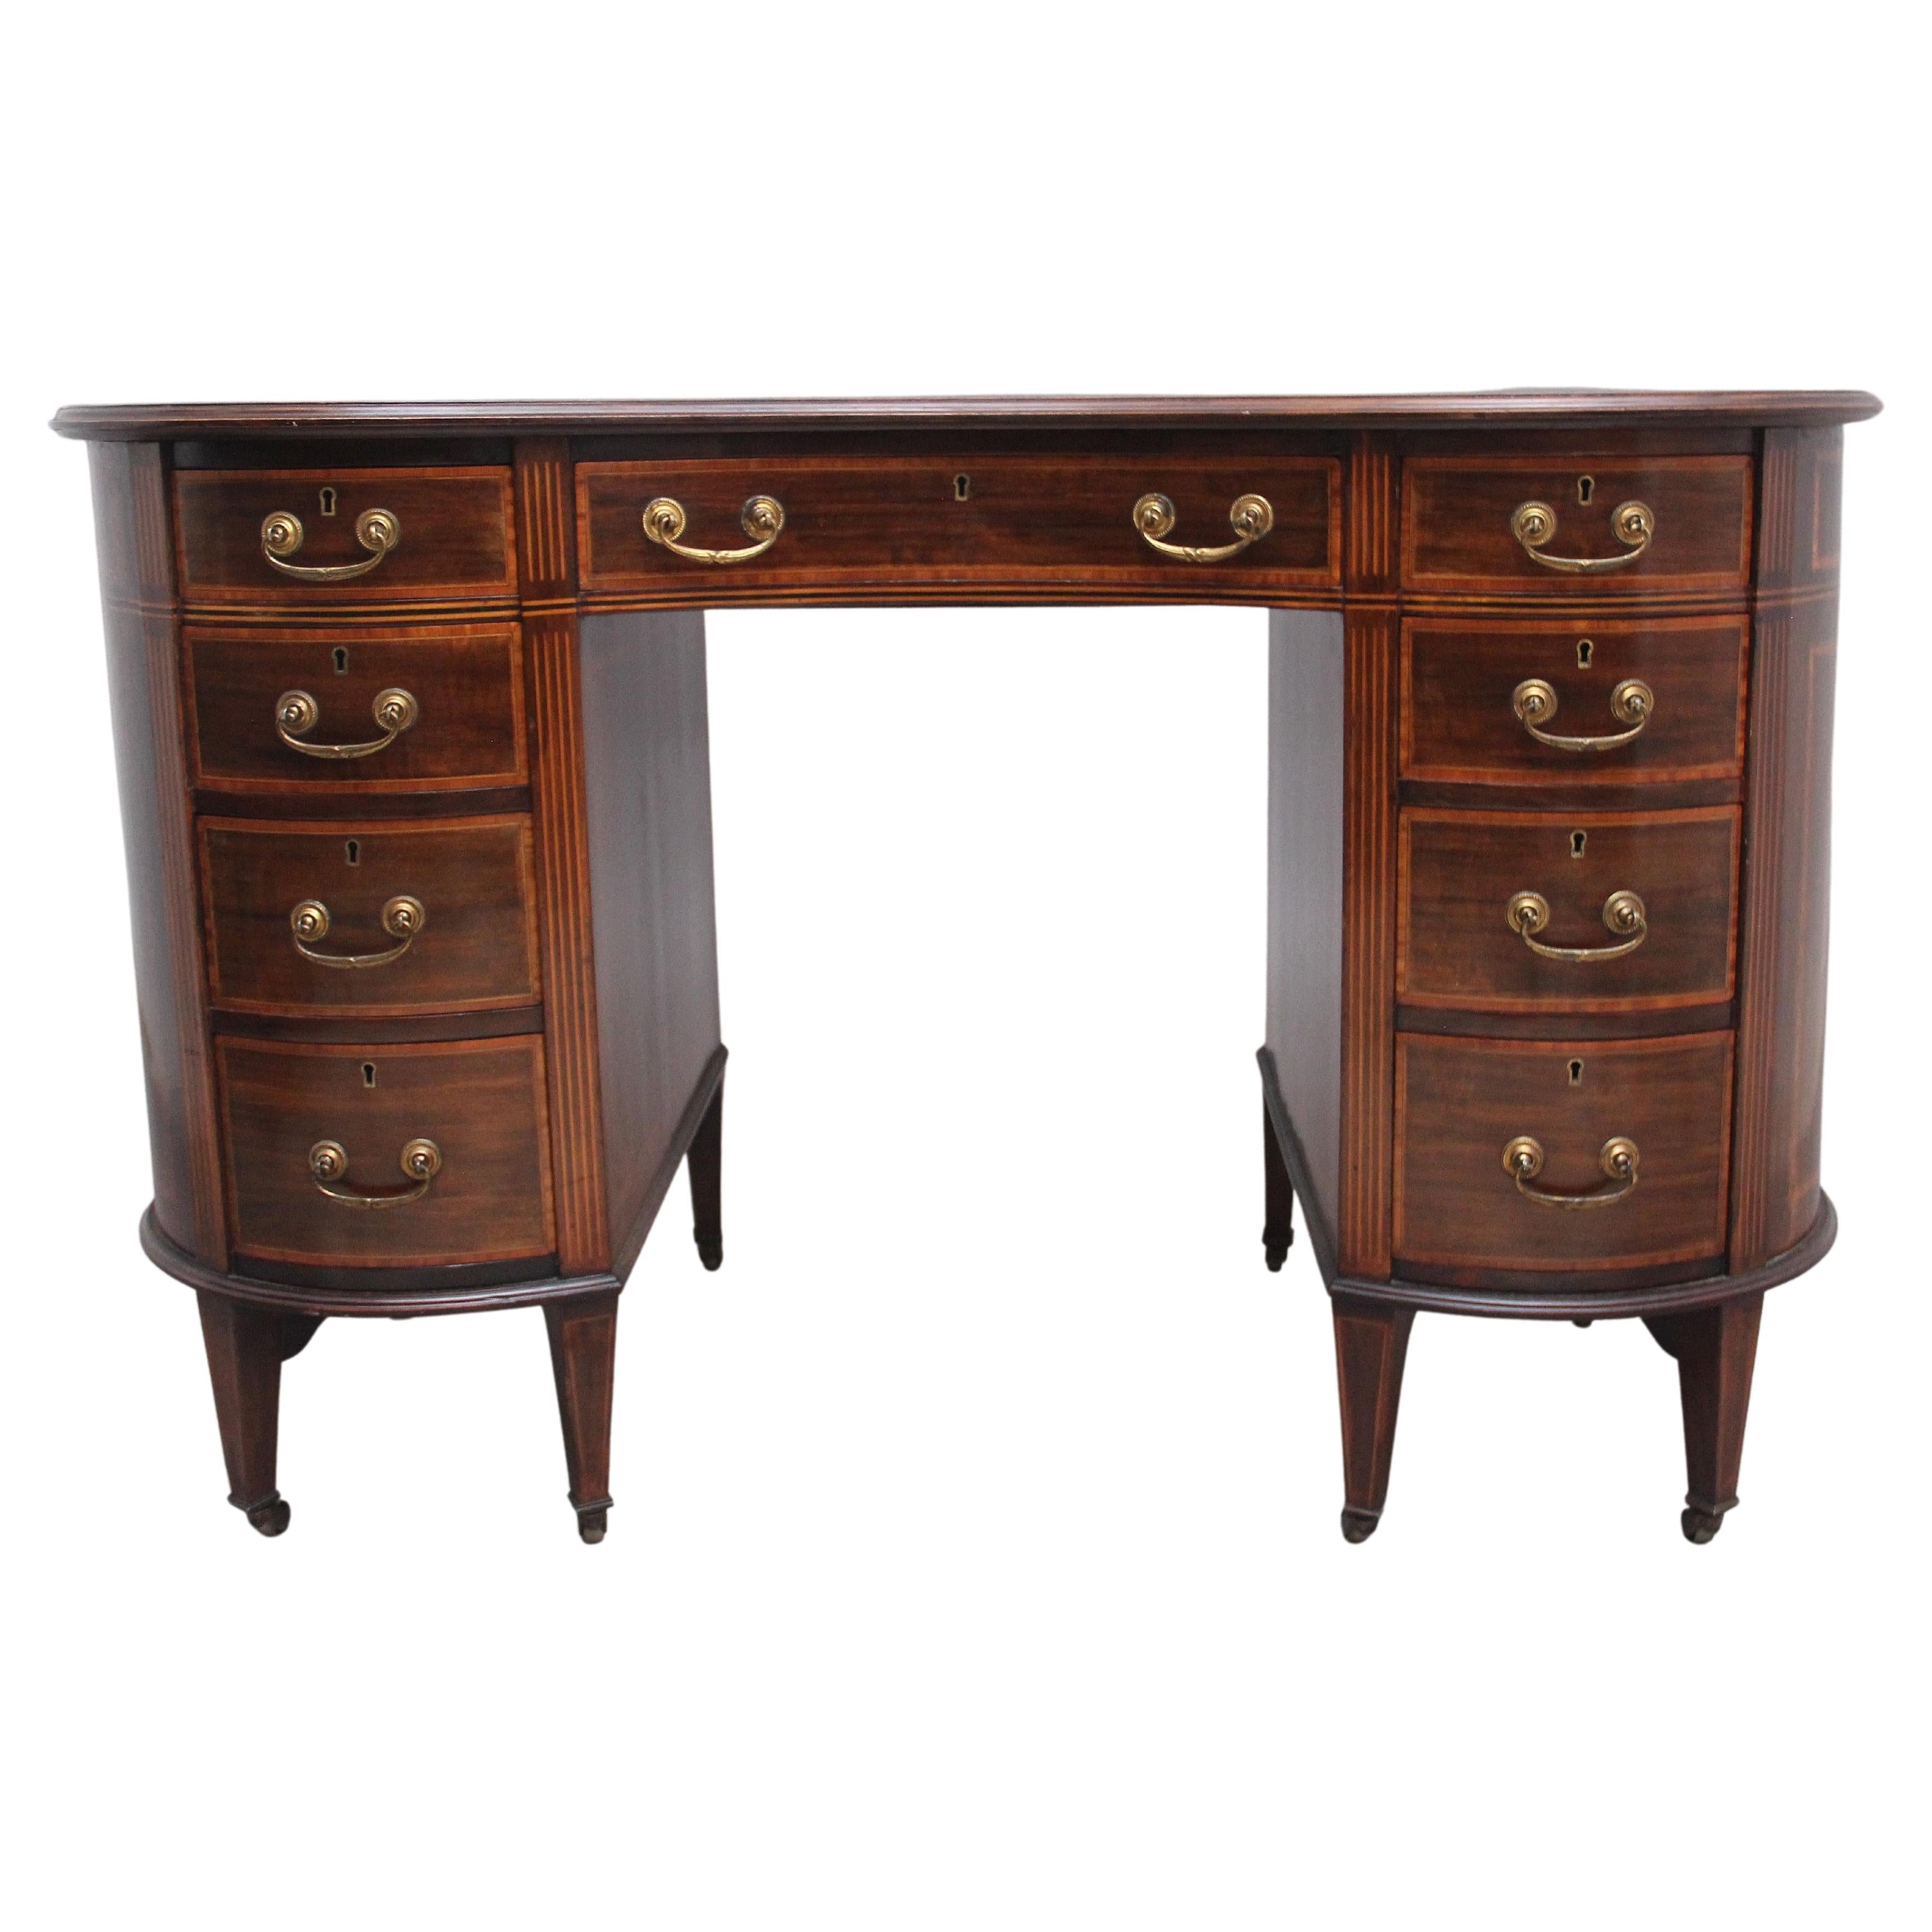 19th Century Inlaid Mahogany Kidney Shaped Desk For Sale